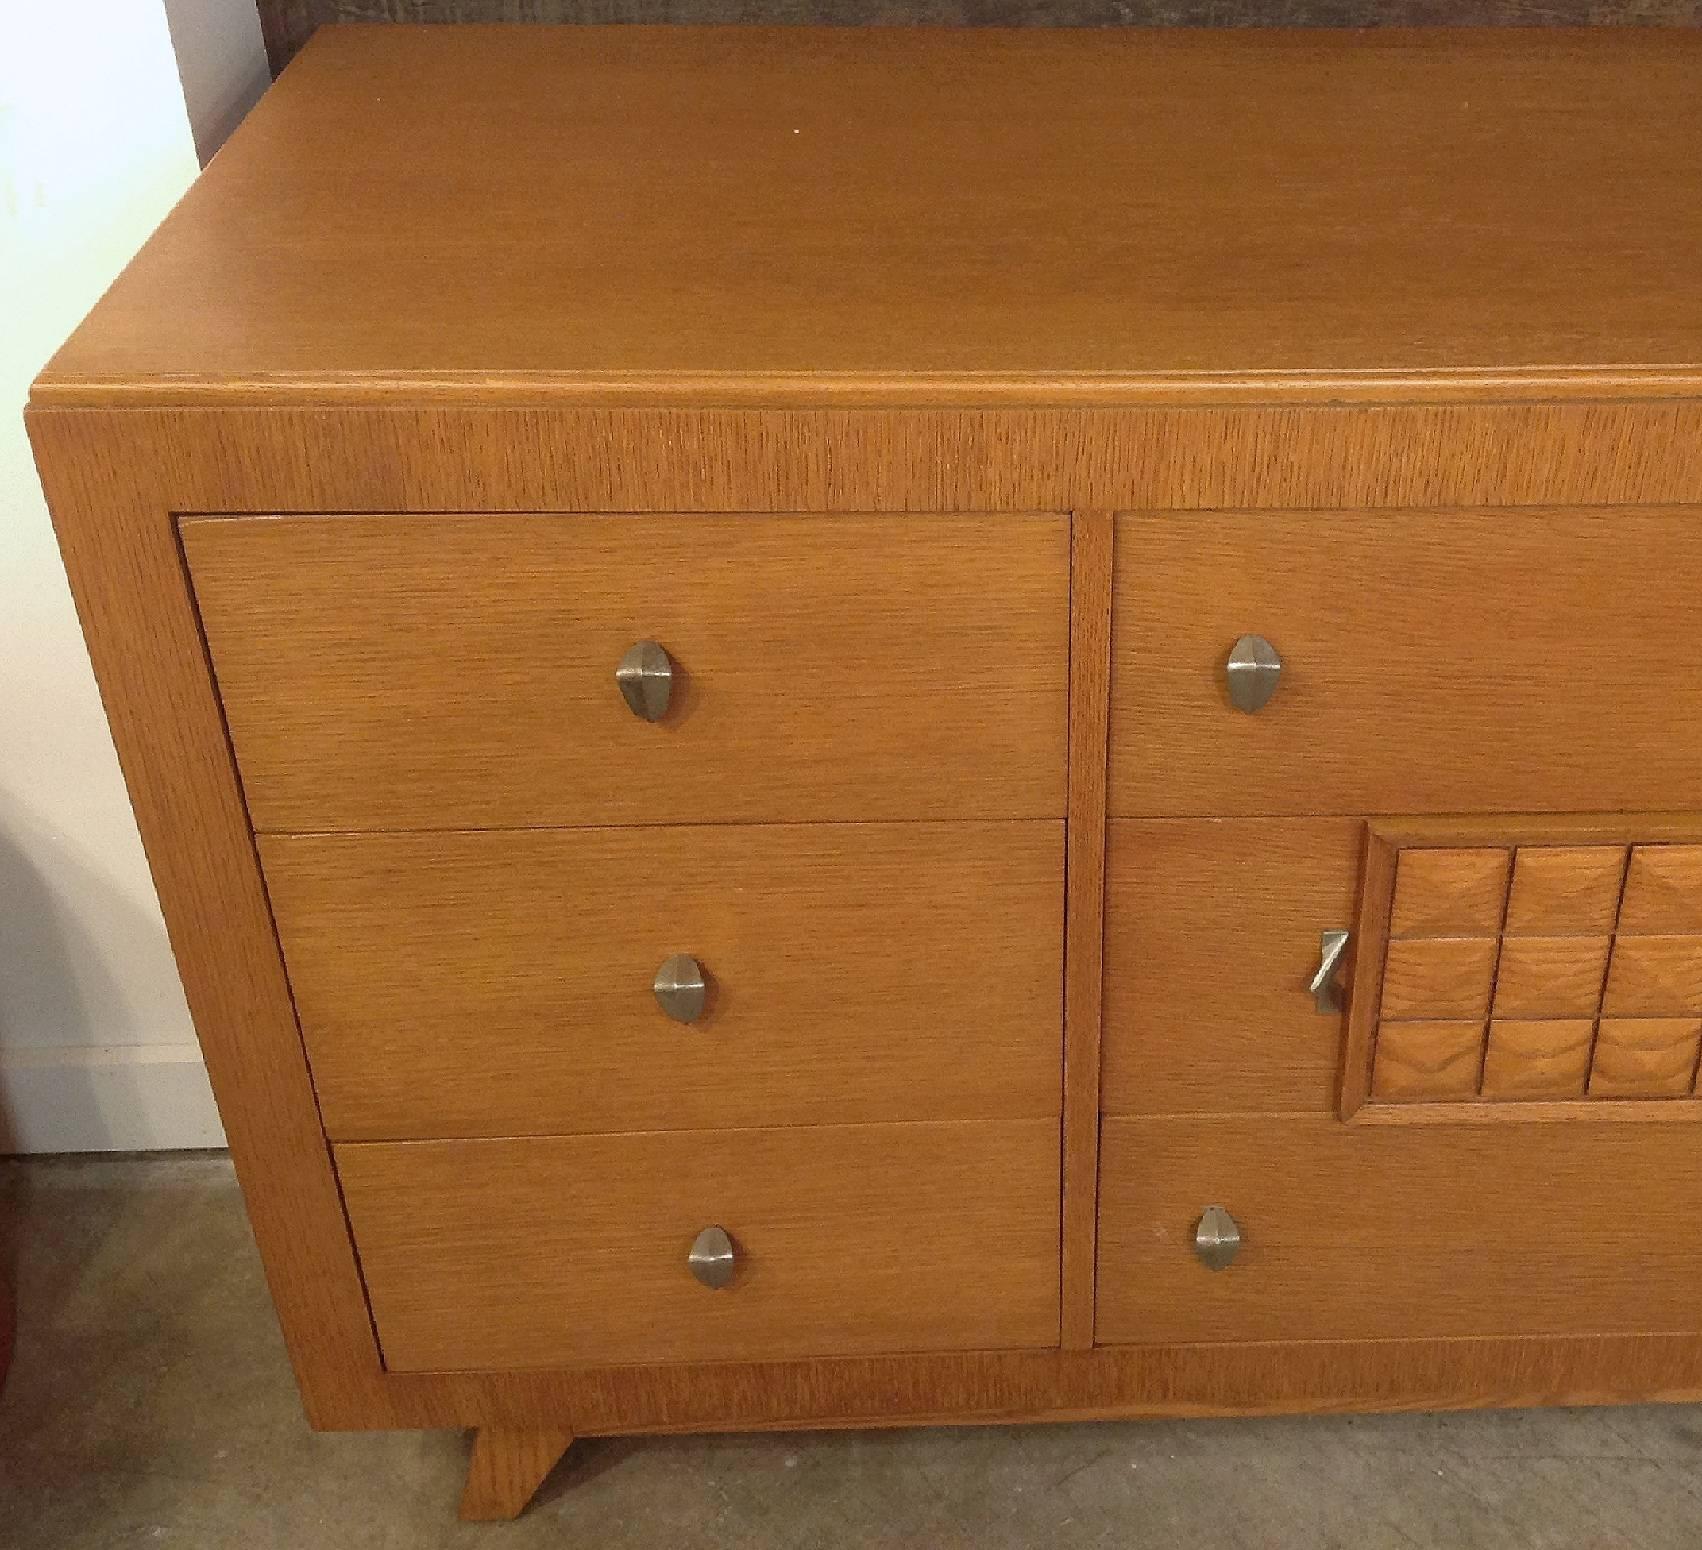 An elegant chest of drawers in riff cut and combed oak. Most likely American paying homage to the french designers of the 1940s like Gaston Poisson, Rene Gabriel and Charles Dudouyt. Top two center bank of drawers have fitted interiors. Modernist